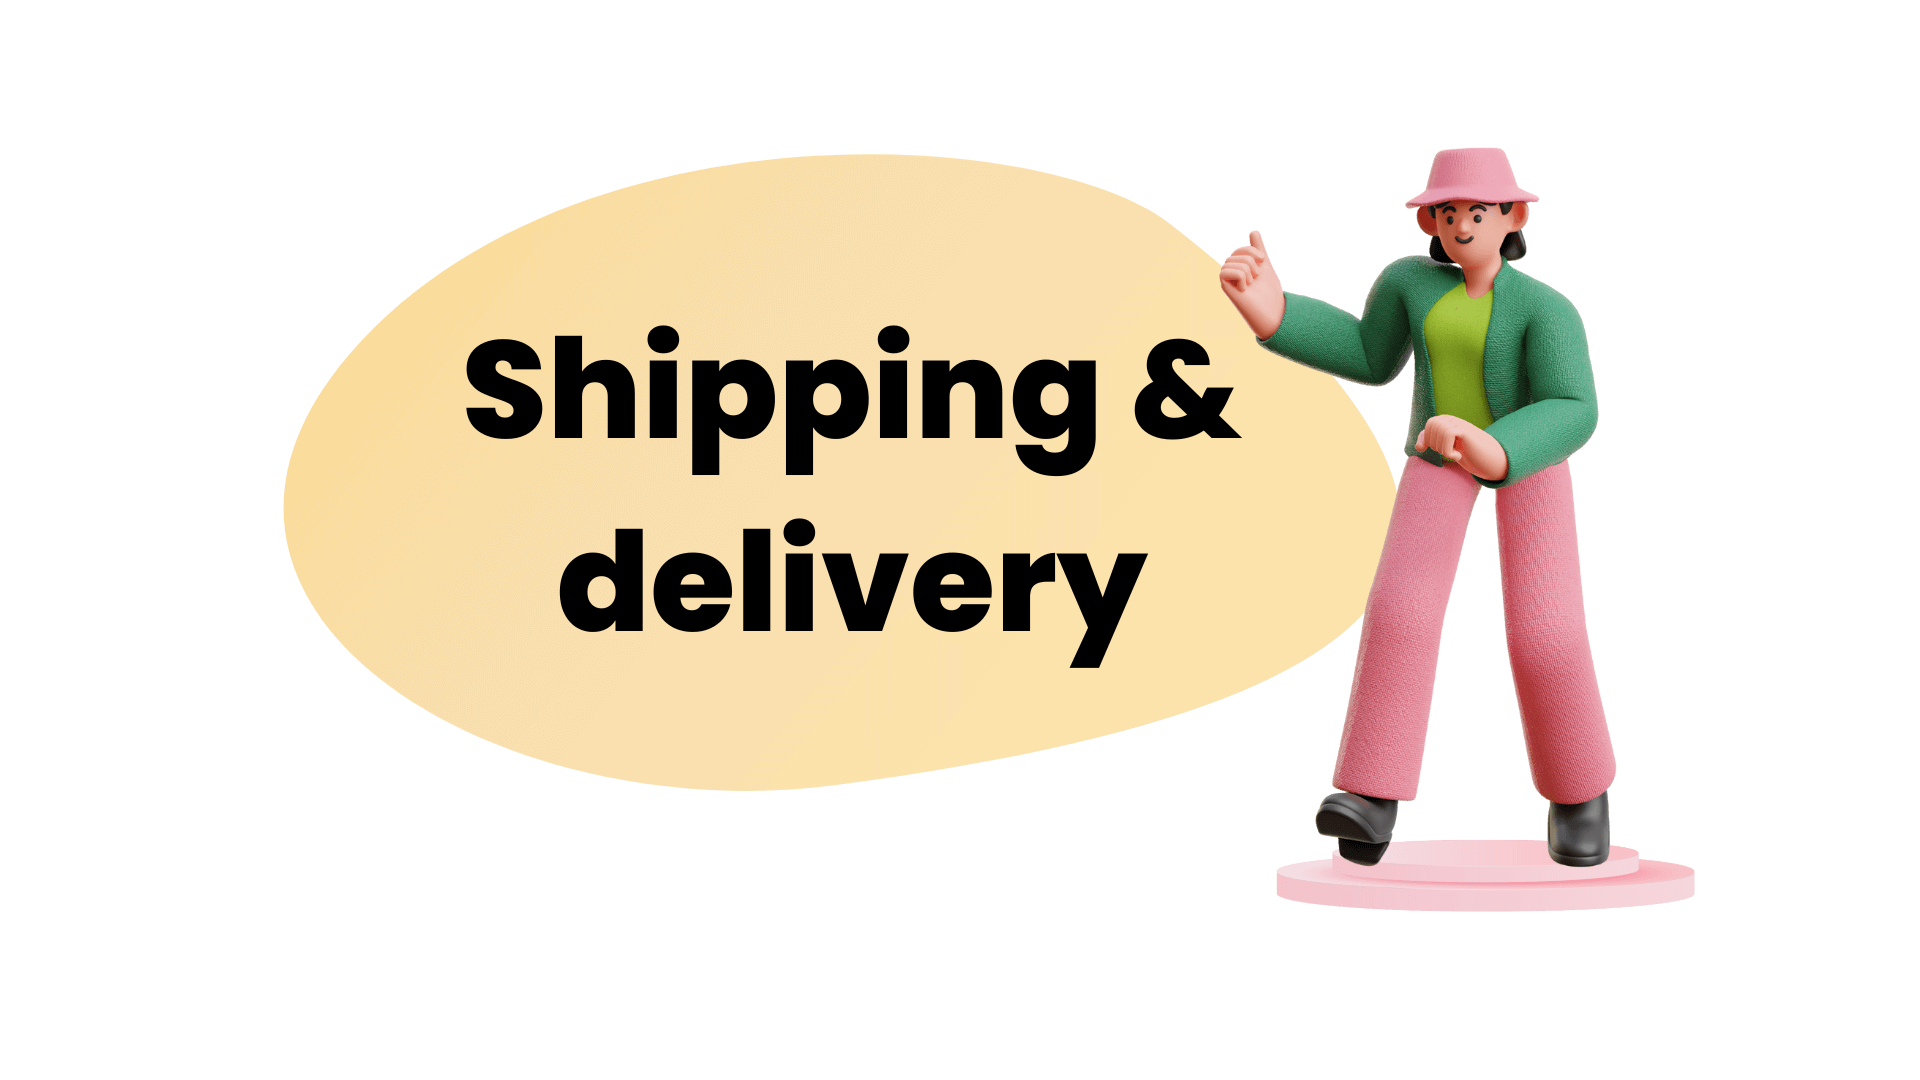 WeThera - Shipping & delivery